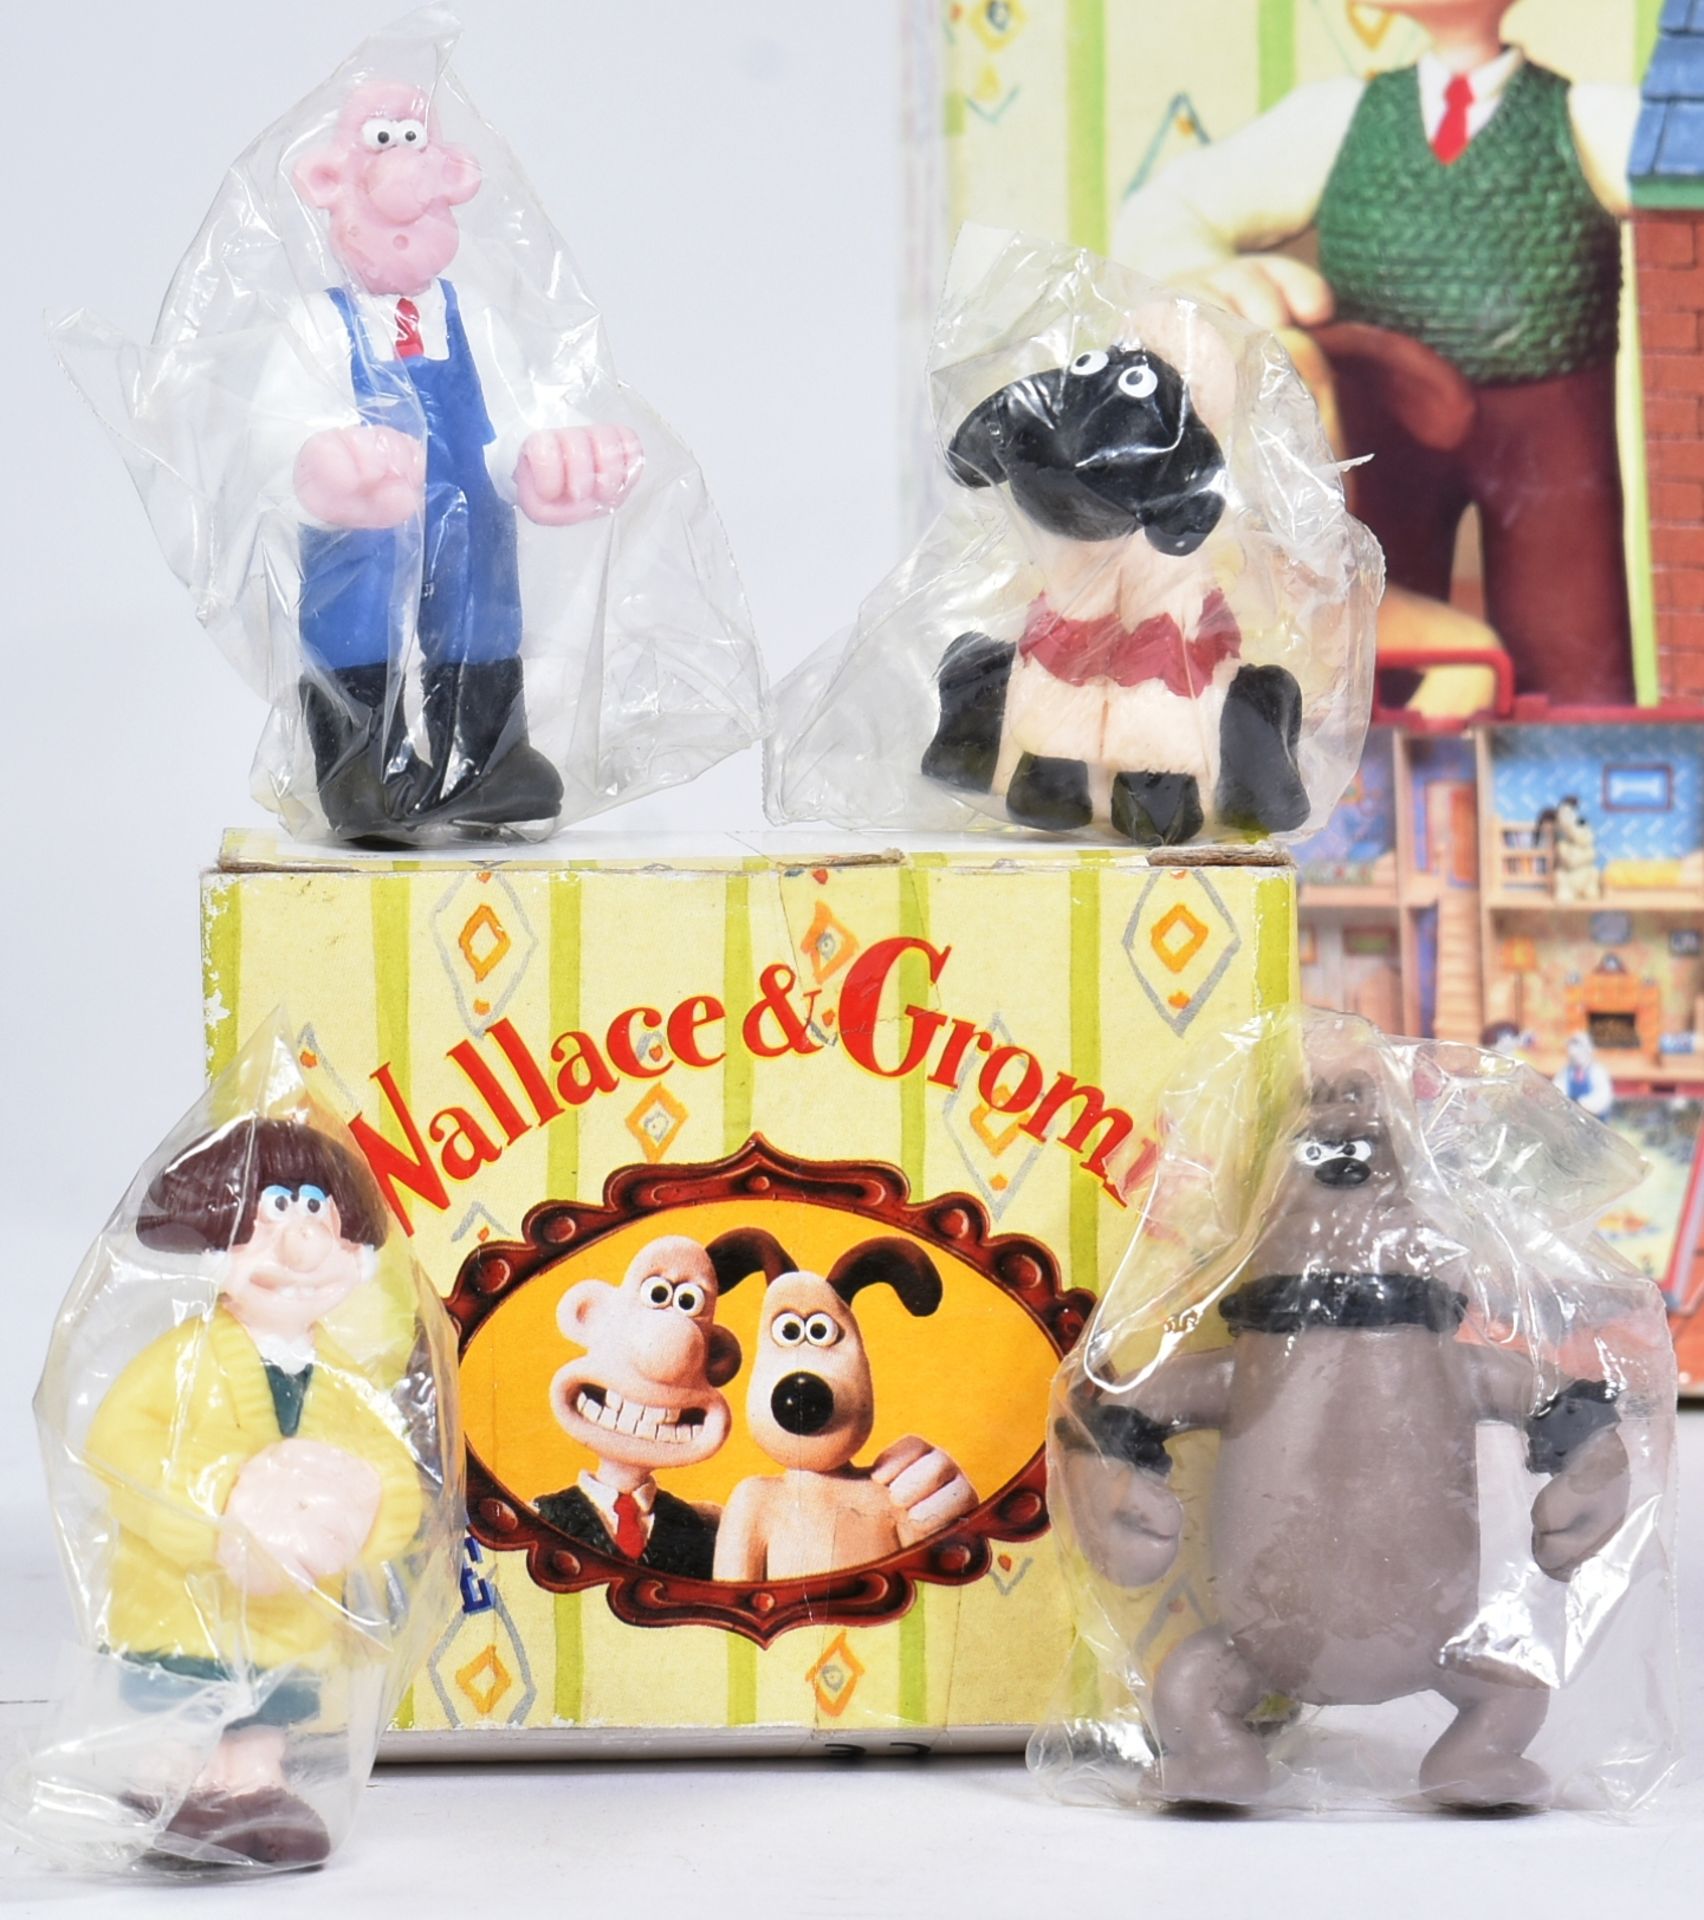 WALLACE & GROMIT - WEST WALLABY STREET PLAYHOUSE - Image 2 of 5